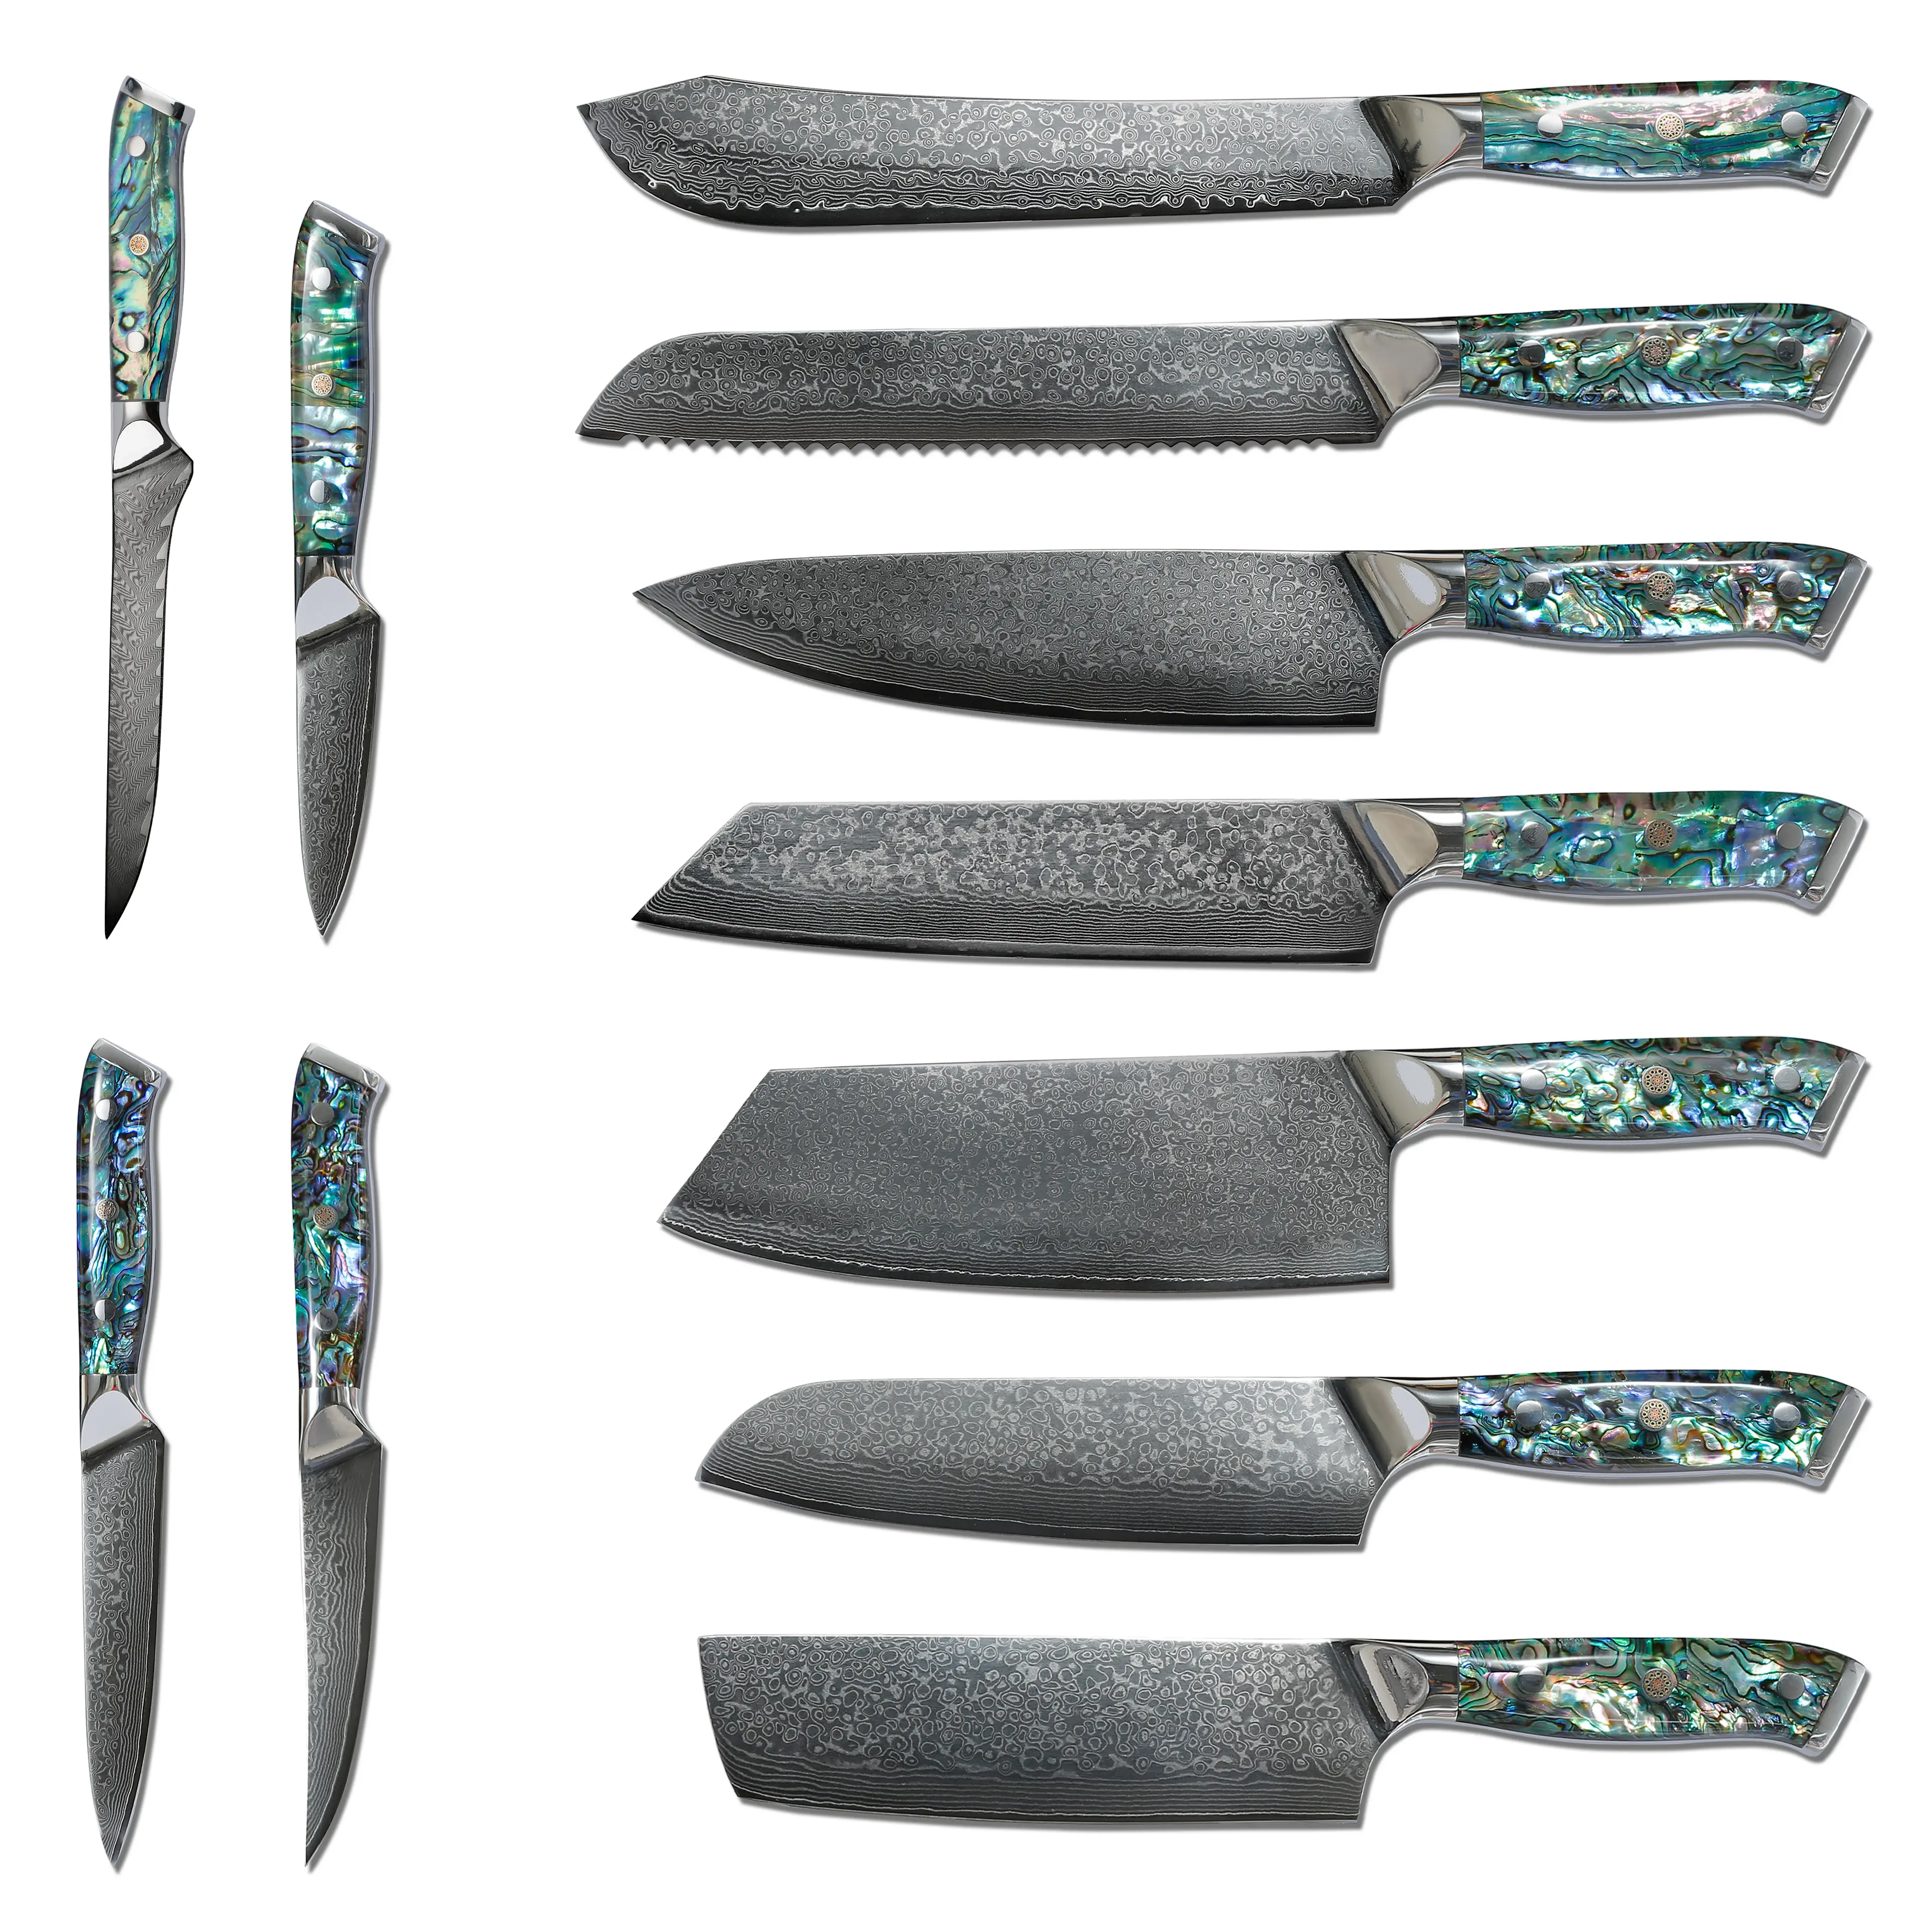 11pcs Luxury Professional Colorful Resin Handle Damascus 9cr18 Carbon Steel Cleaver Meat Cutting Modern Kitchen Knife Set